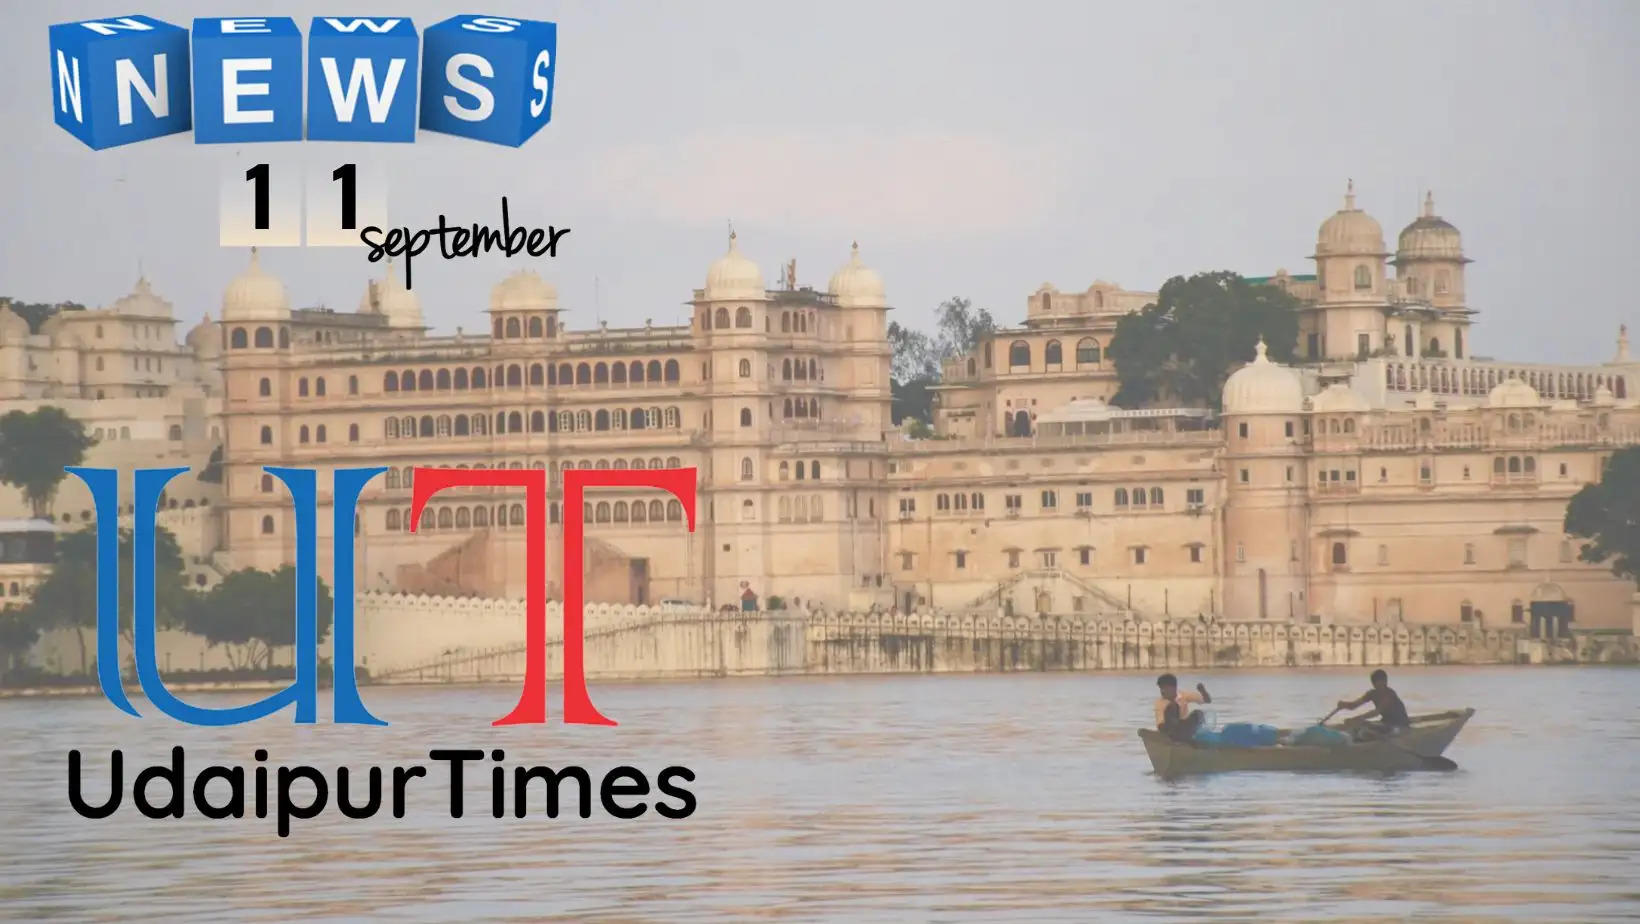 Latest News from Udaipur, Latest News from Rajsamand, Latest News from Chittorgarh,  Latest News Dungarpur, Latest News from Banswara, Latest news from Pratapgarh, Latest News from Salumbar